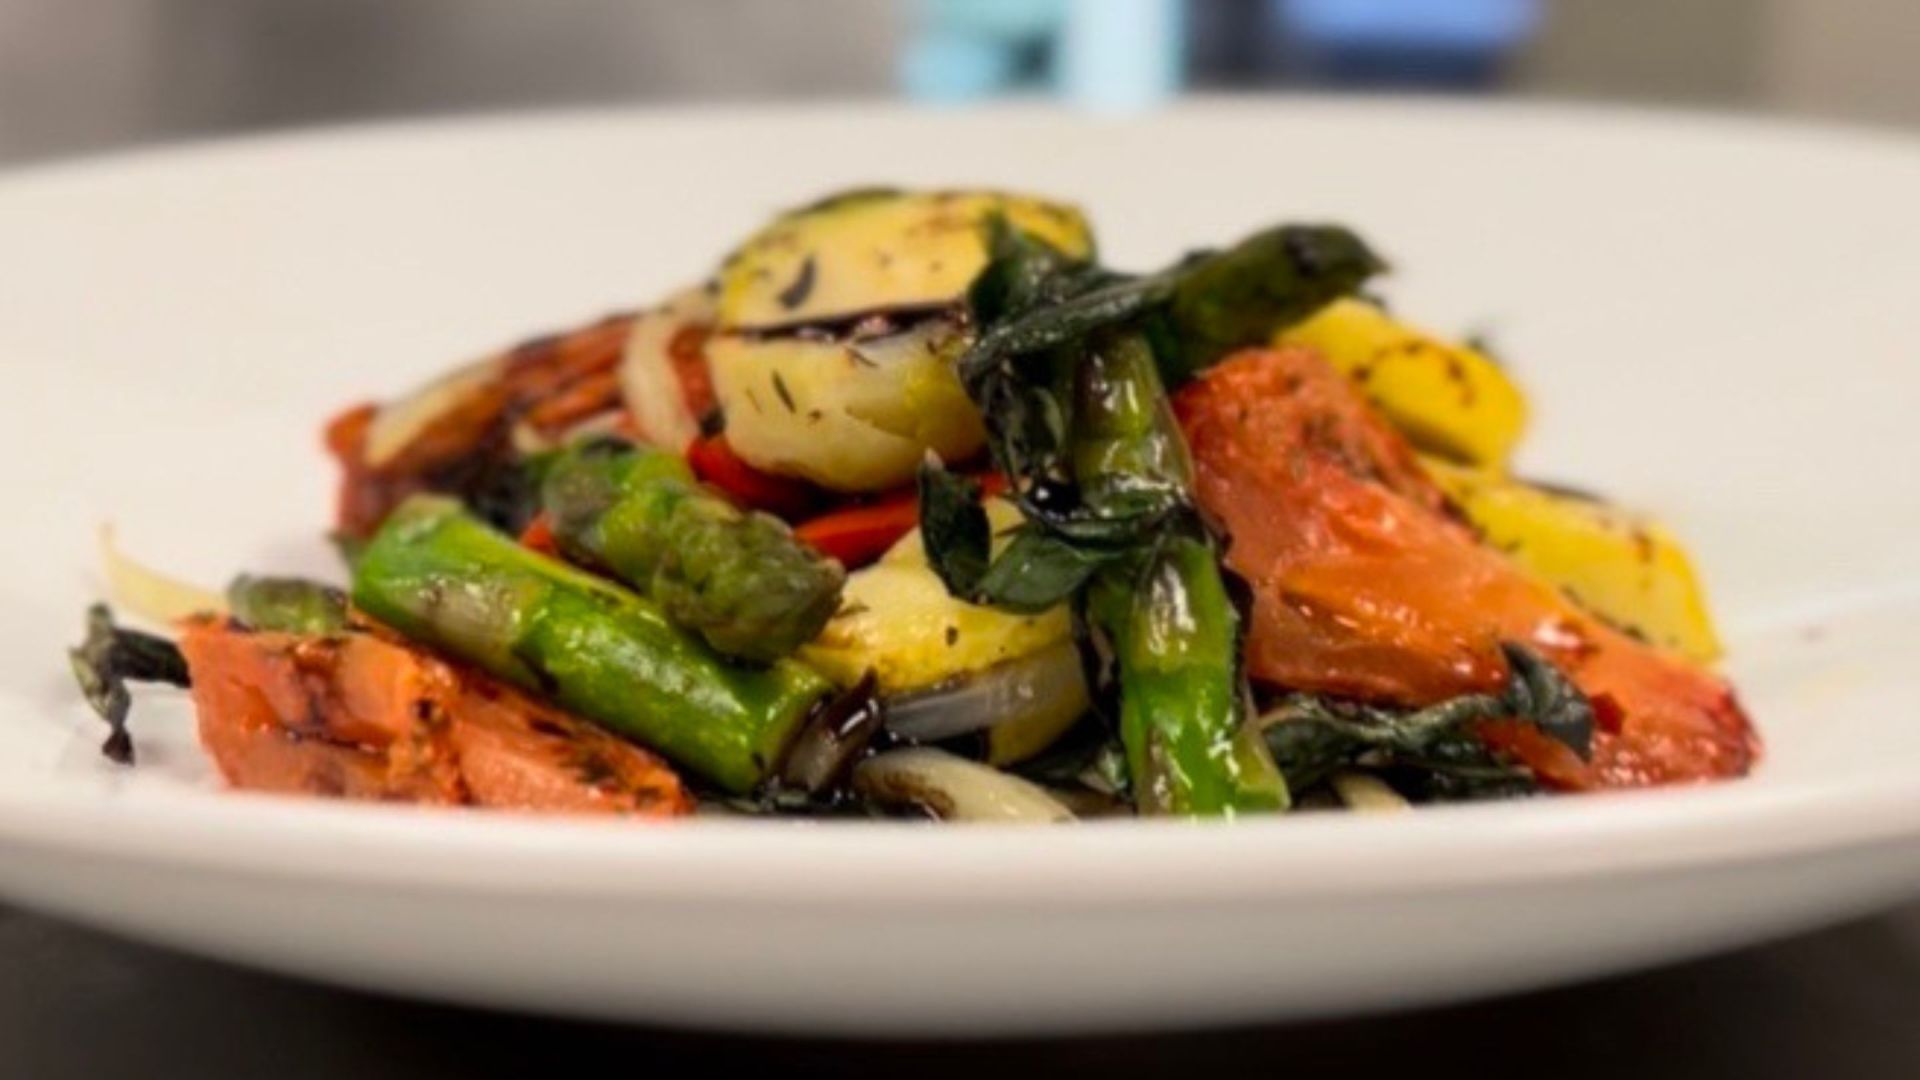 Roasted Vegetables from Hilton Americas-Houston